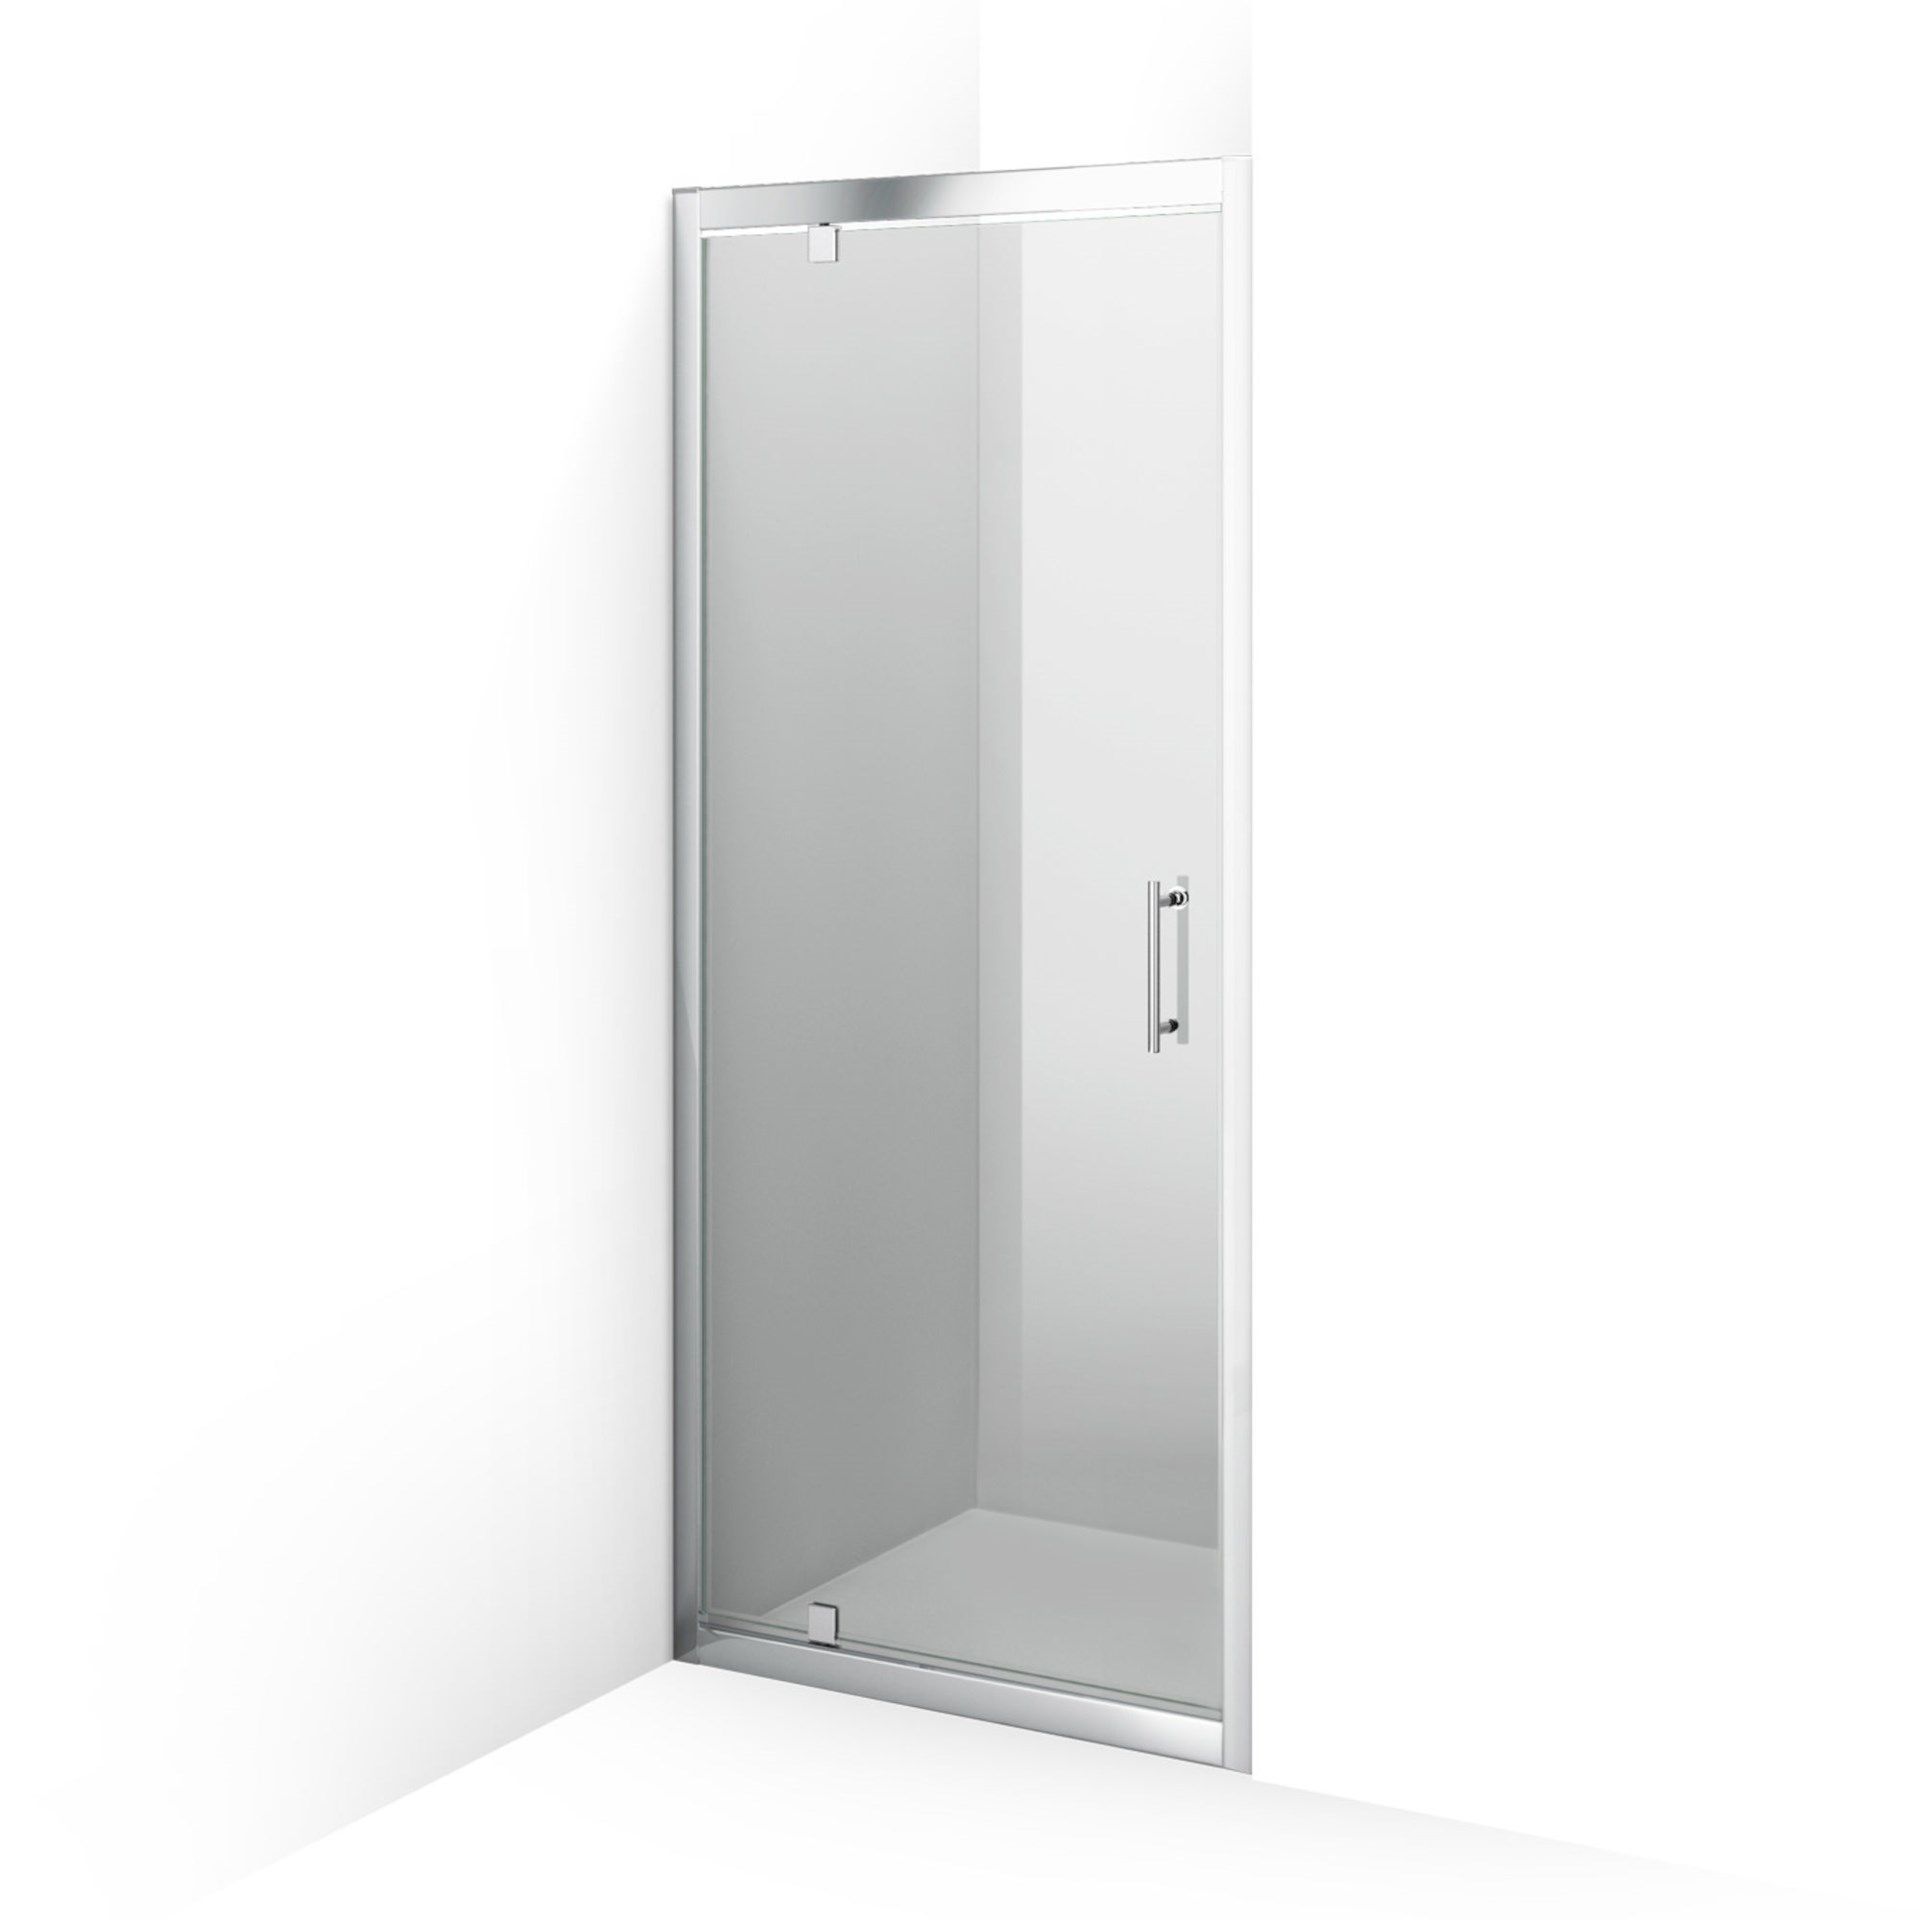 NEW & BOXED Twyfords 700mm - 6mm - Premium Pivot Shower Door. RRP £299.99.8mm Safety Glass Fu... - Image 2 of 2